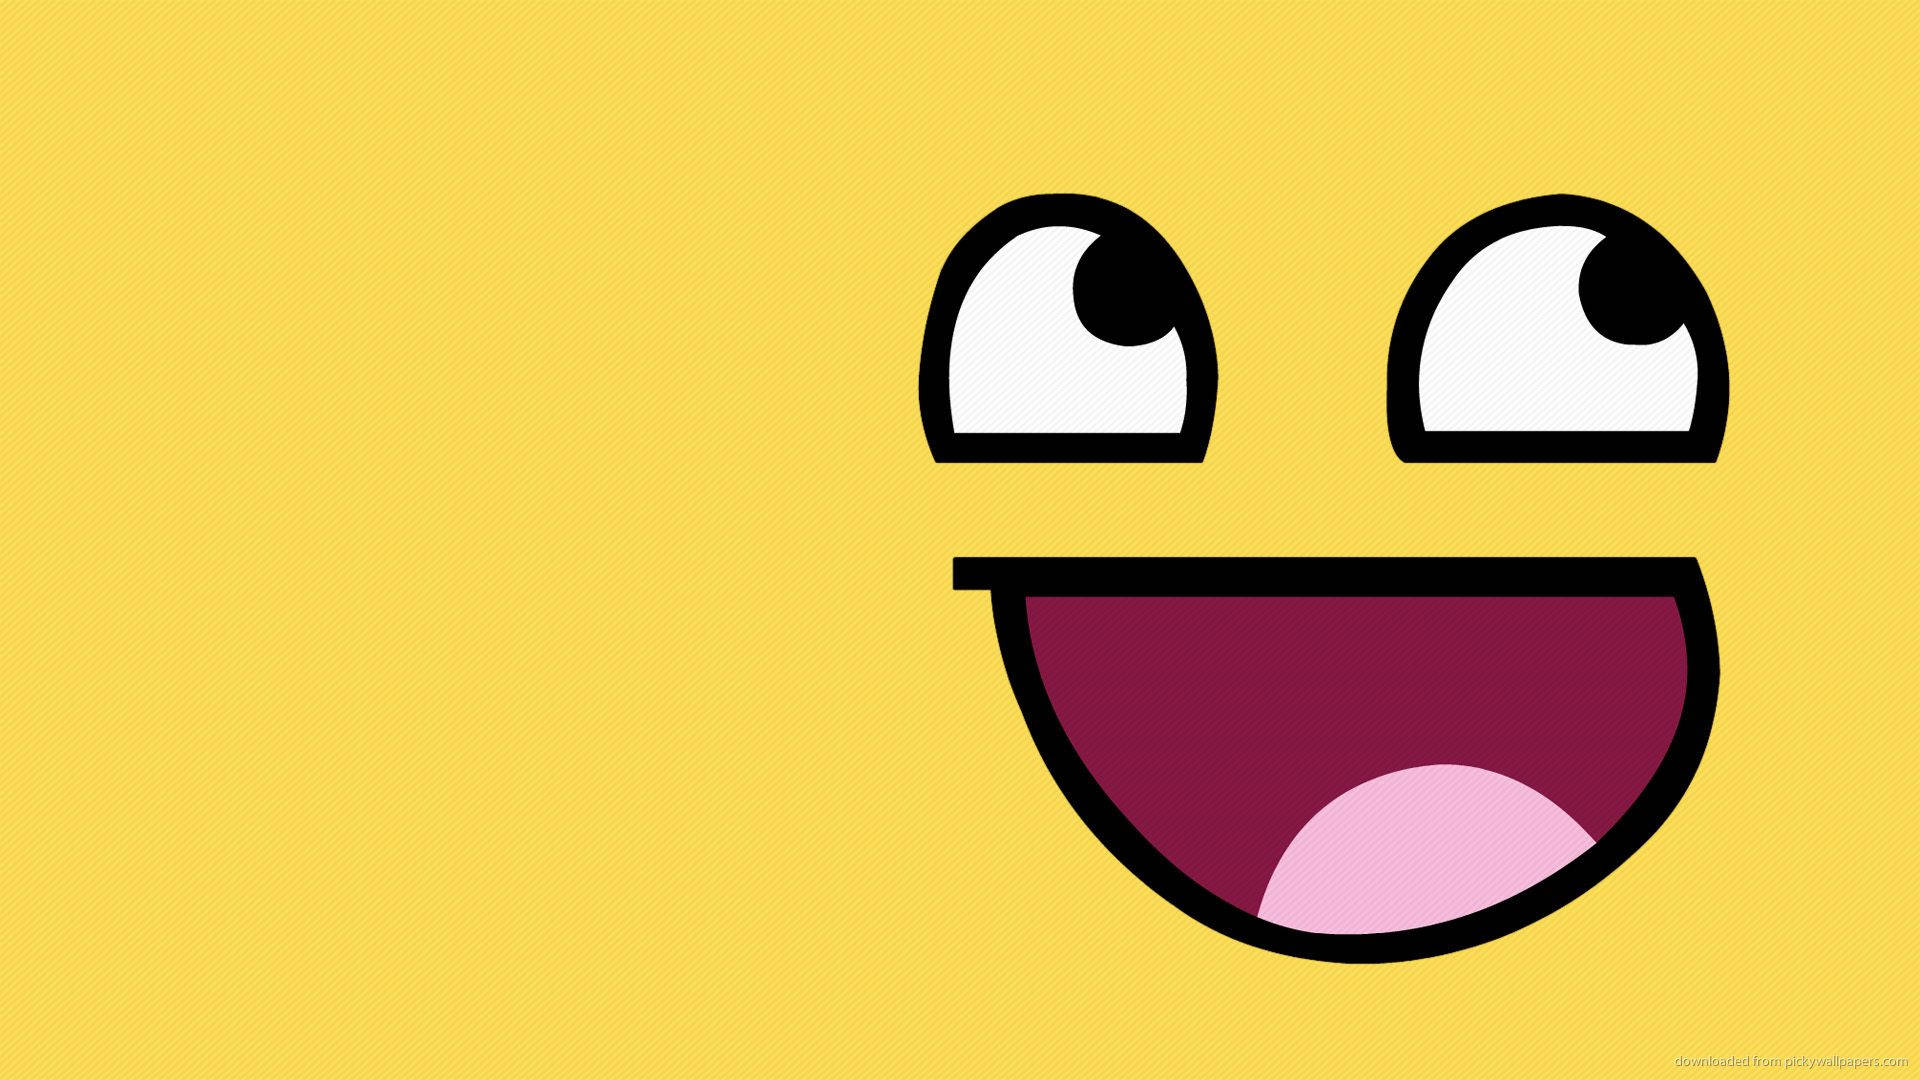 Awesome Face Epic Smiley Meme